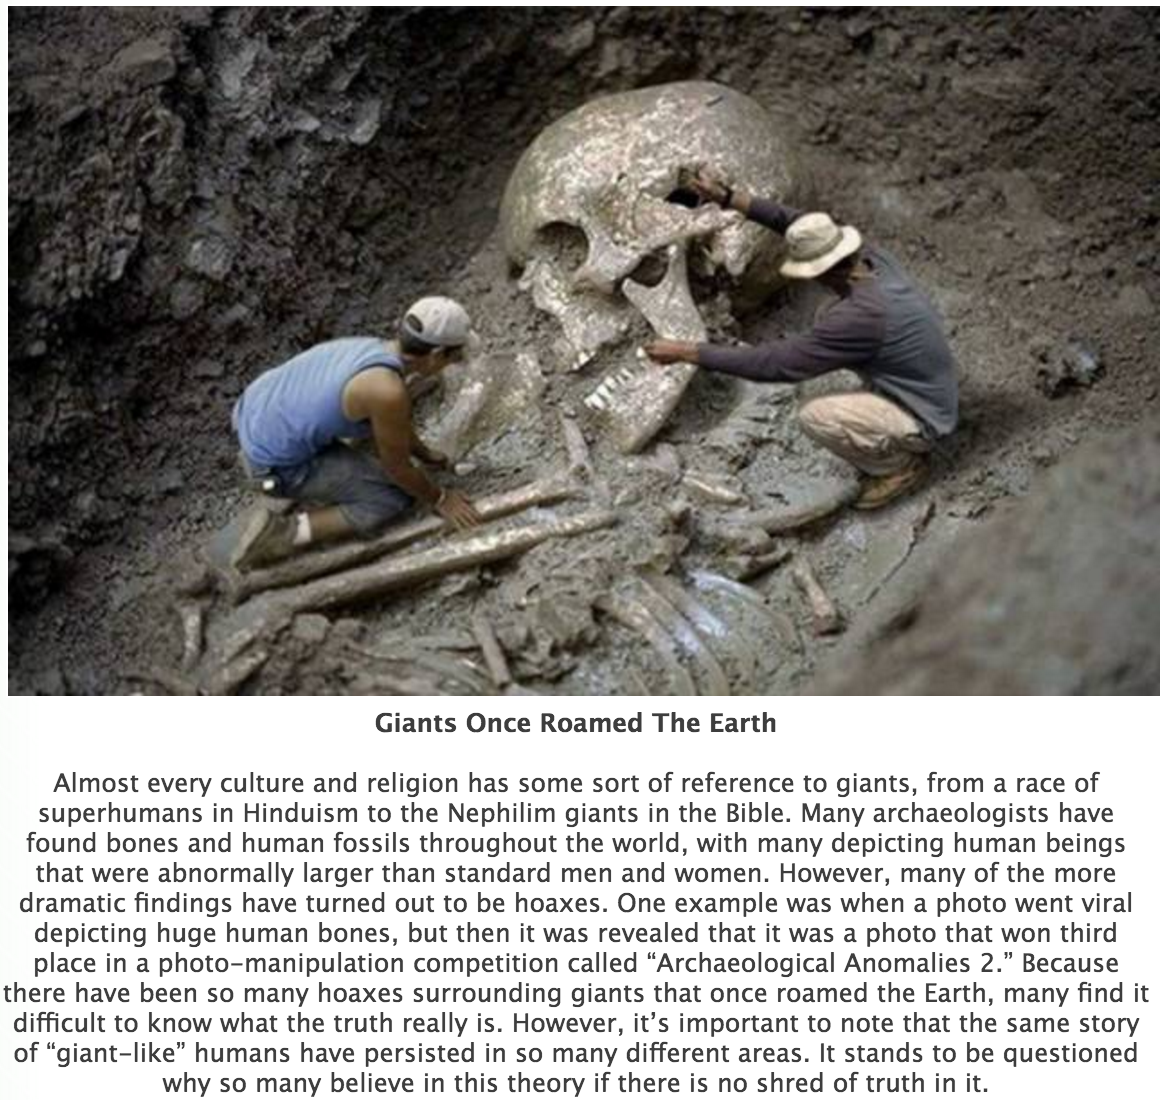 giant skeleton romania - Giants Once Roamed The Earth Almost every culture and religion has some sort of reference to giants, from a race of superhumans in Hinduism to the Nephilim giants in the Bible. Many archaeologists have found bones and human fossil